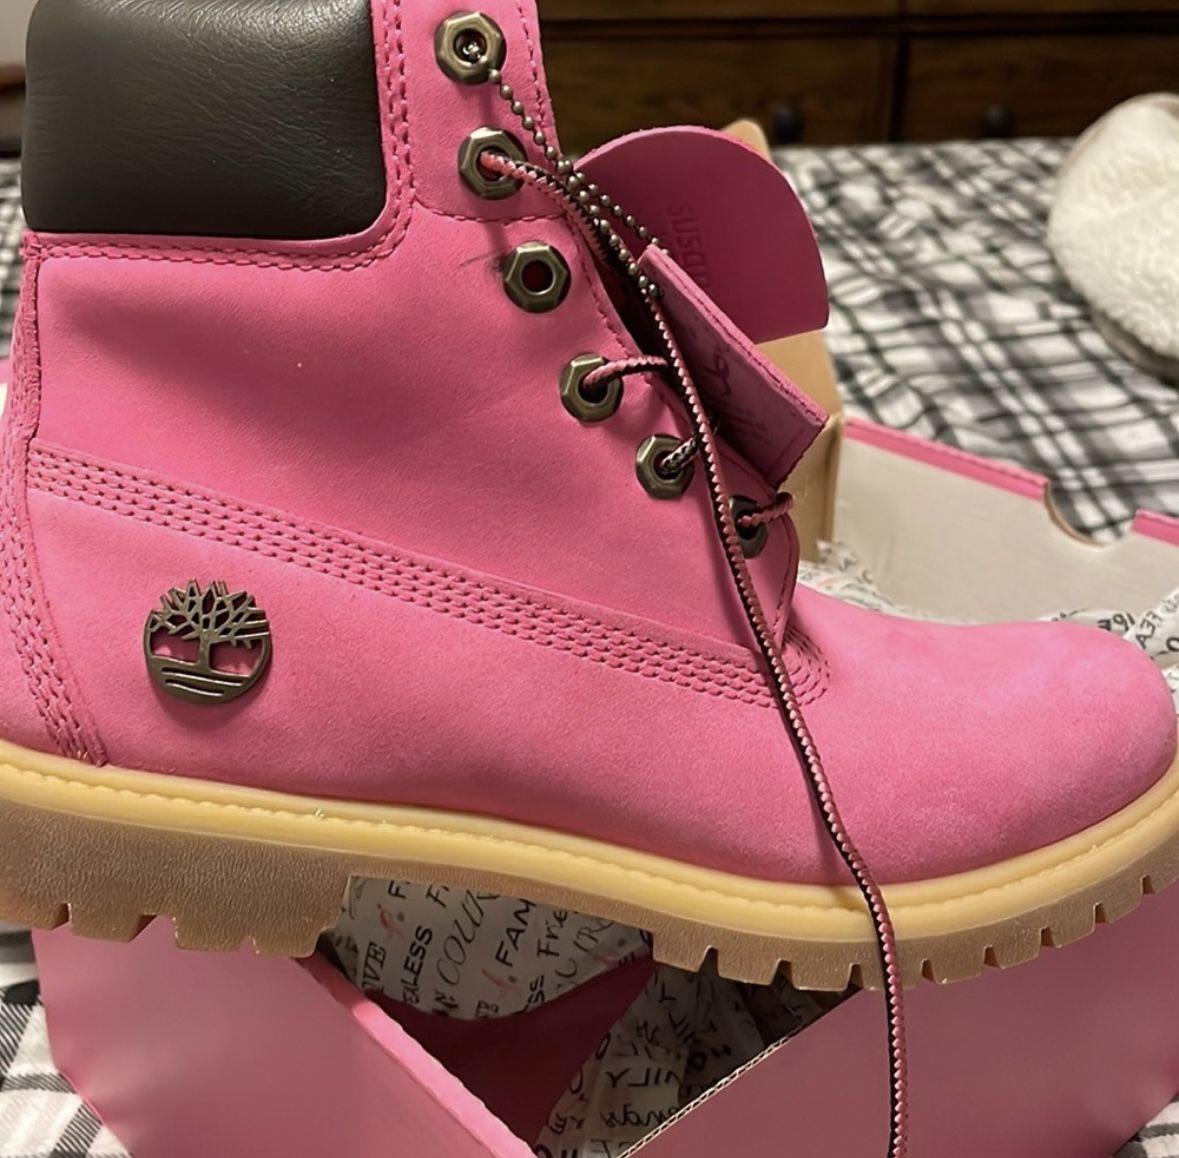 Timberland breast Cáncer Pink 